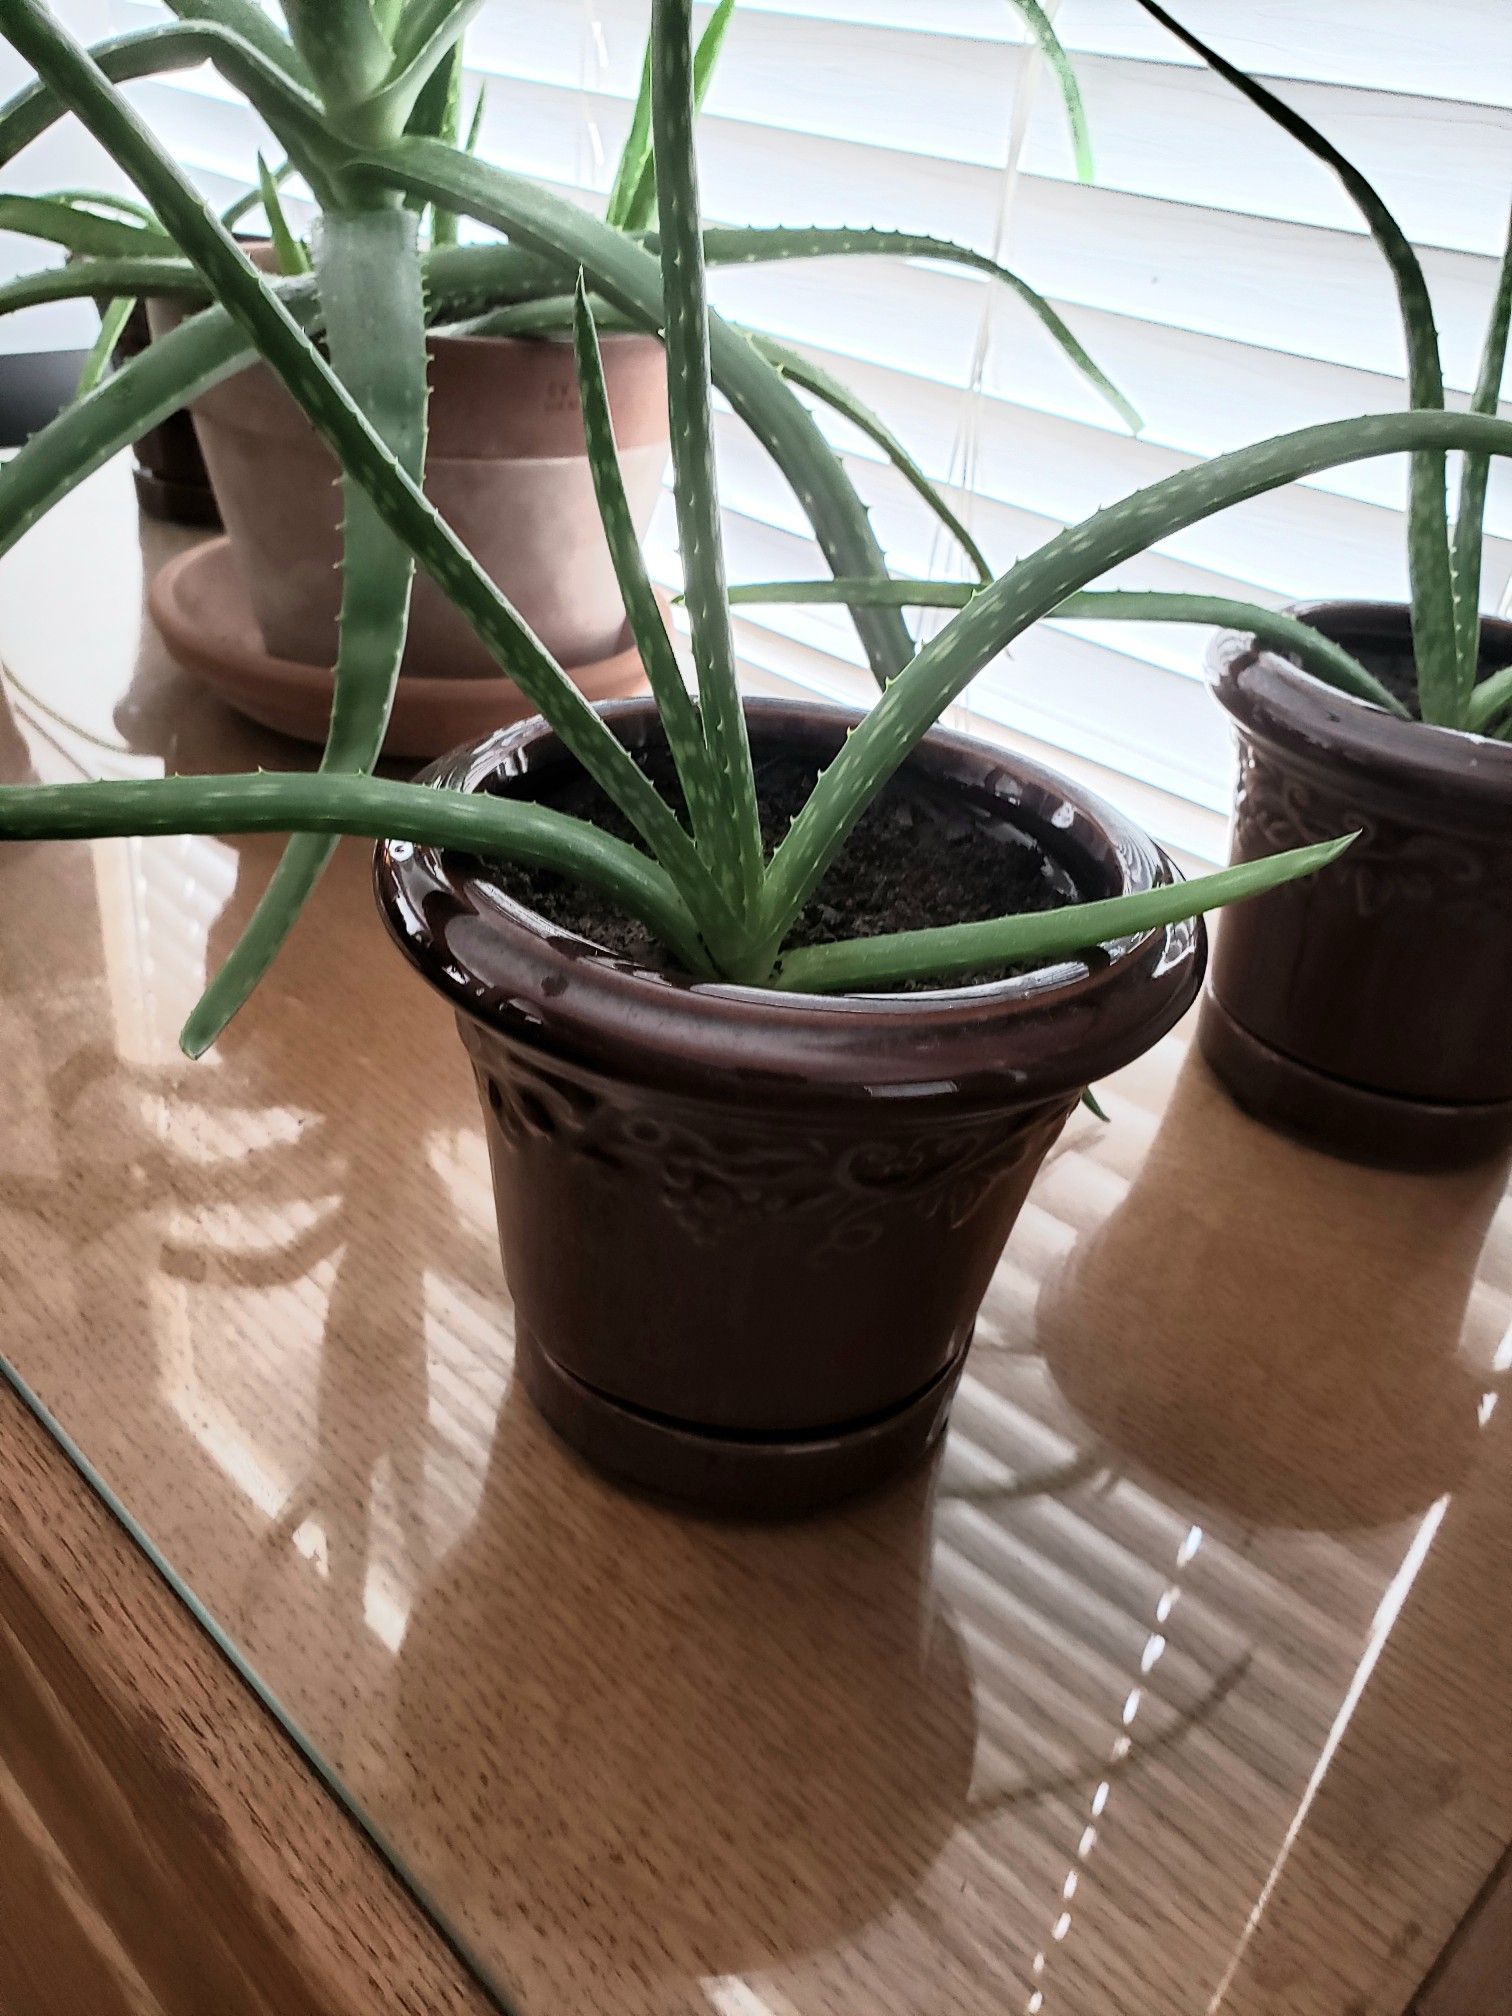 Beautiful Medicinal Aloe Plant in a Decorative Glazed Ceramic Houseplant Pot with built-in Drainage Tray. Have 4 for sale.